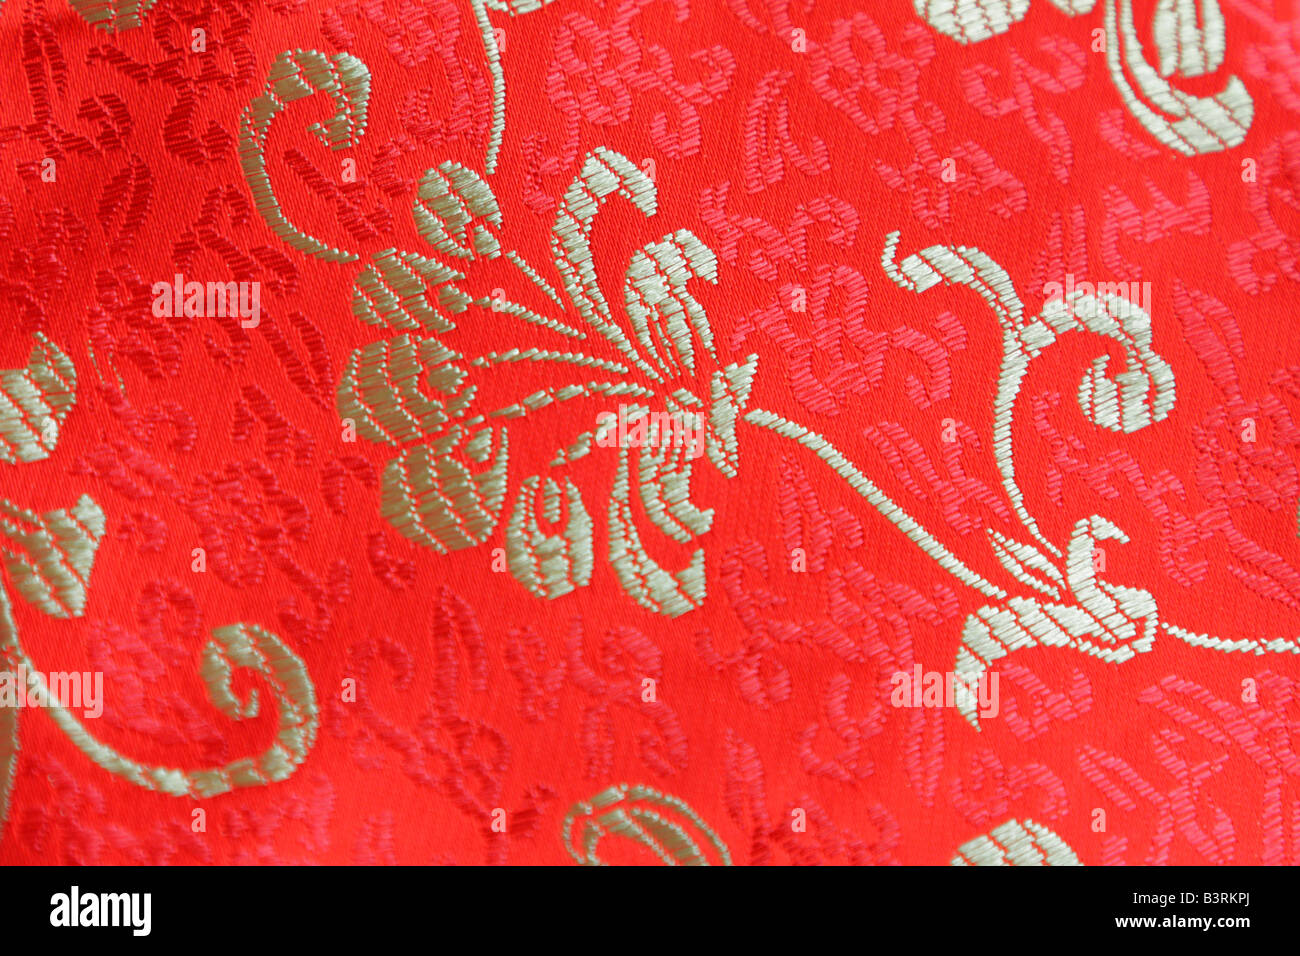 Flower design on red Chinese silk fabric Stock Photo